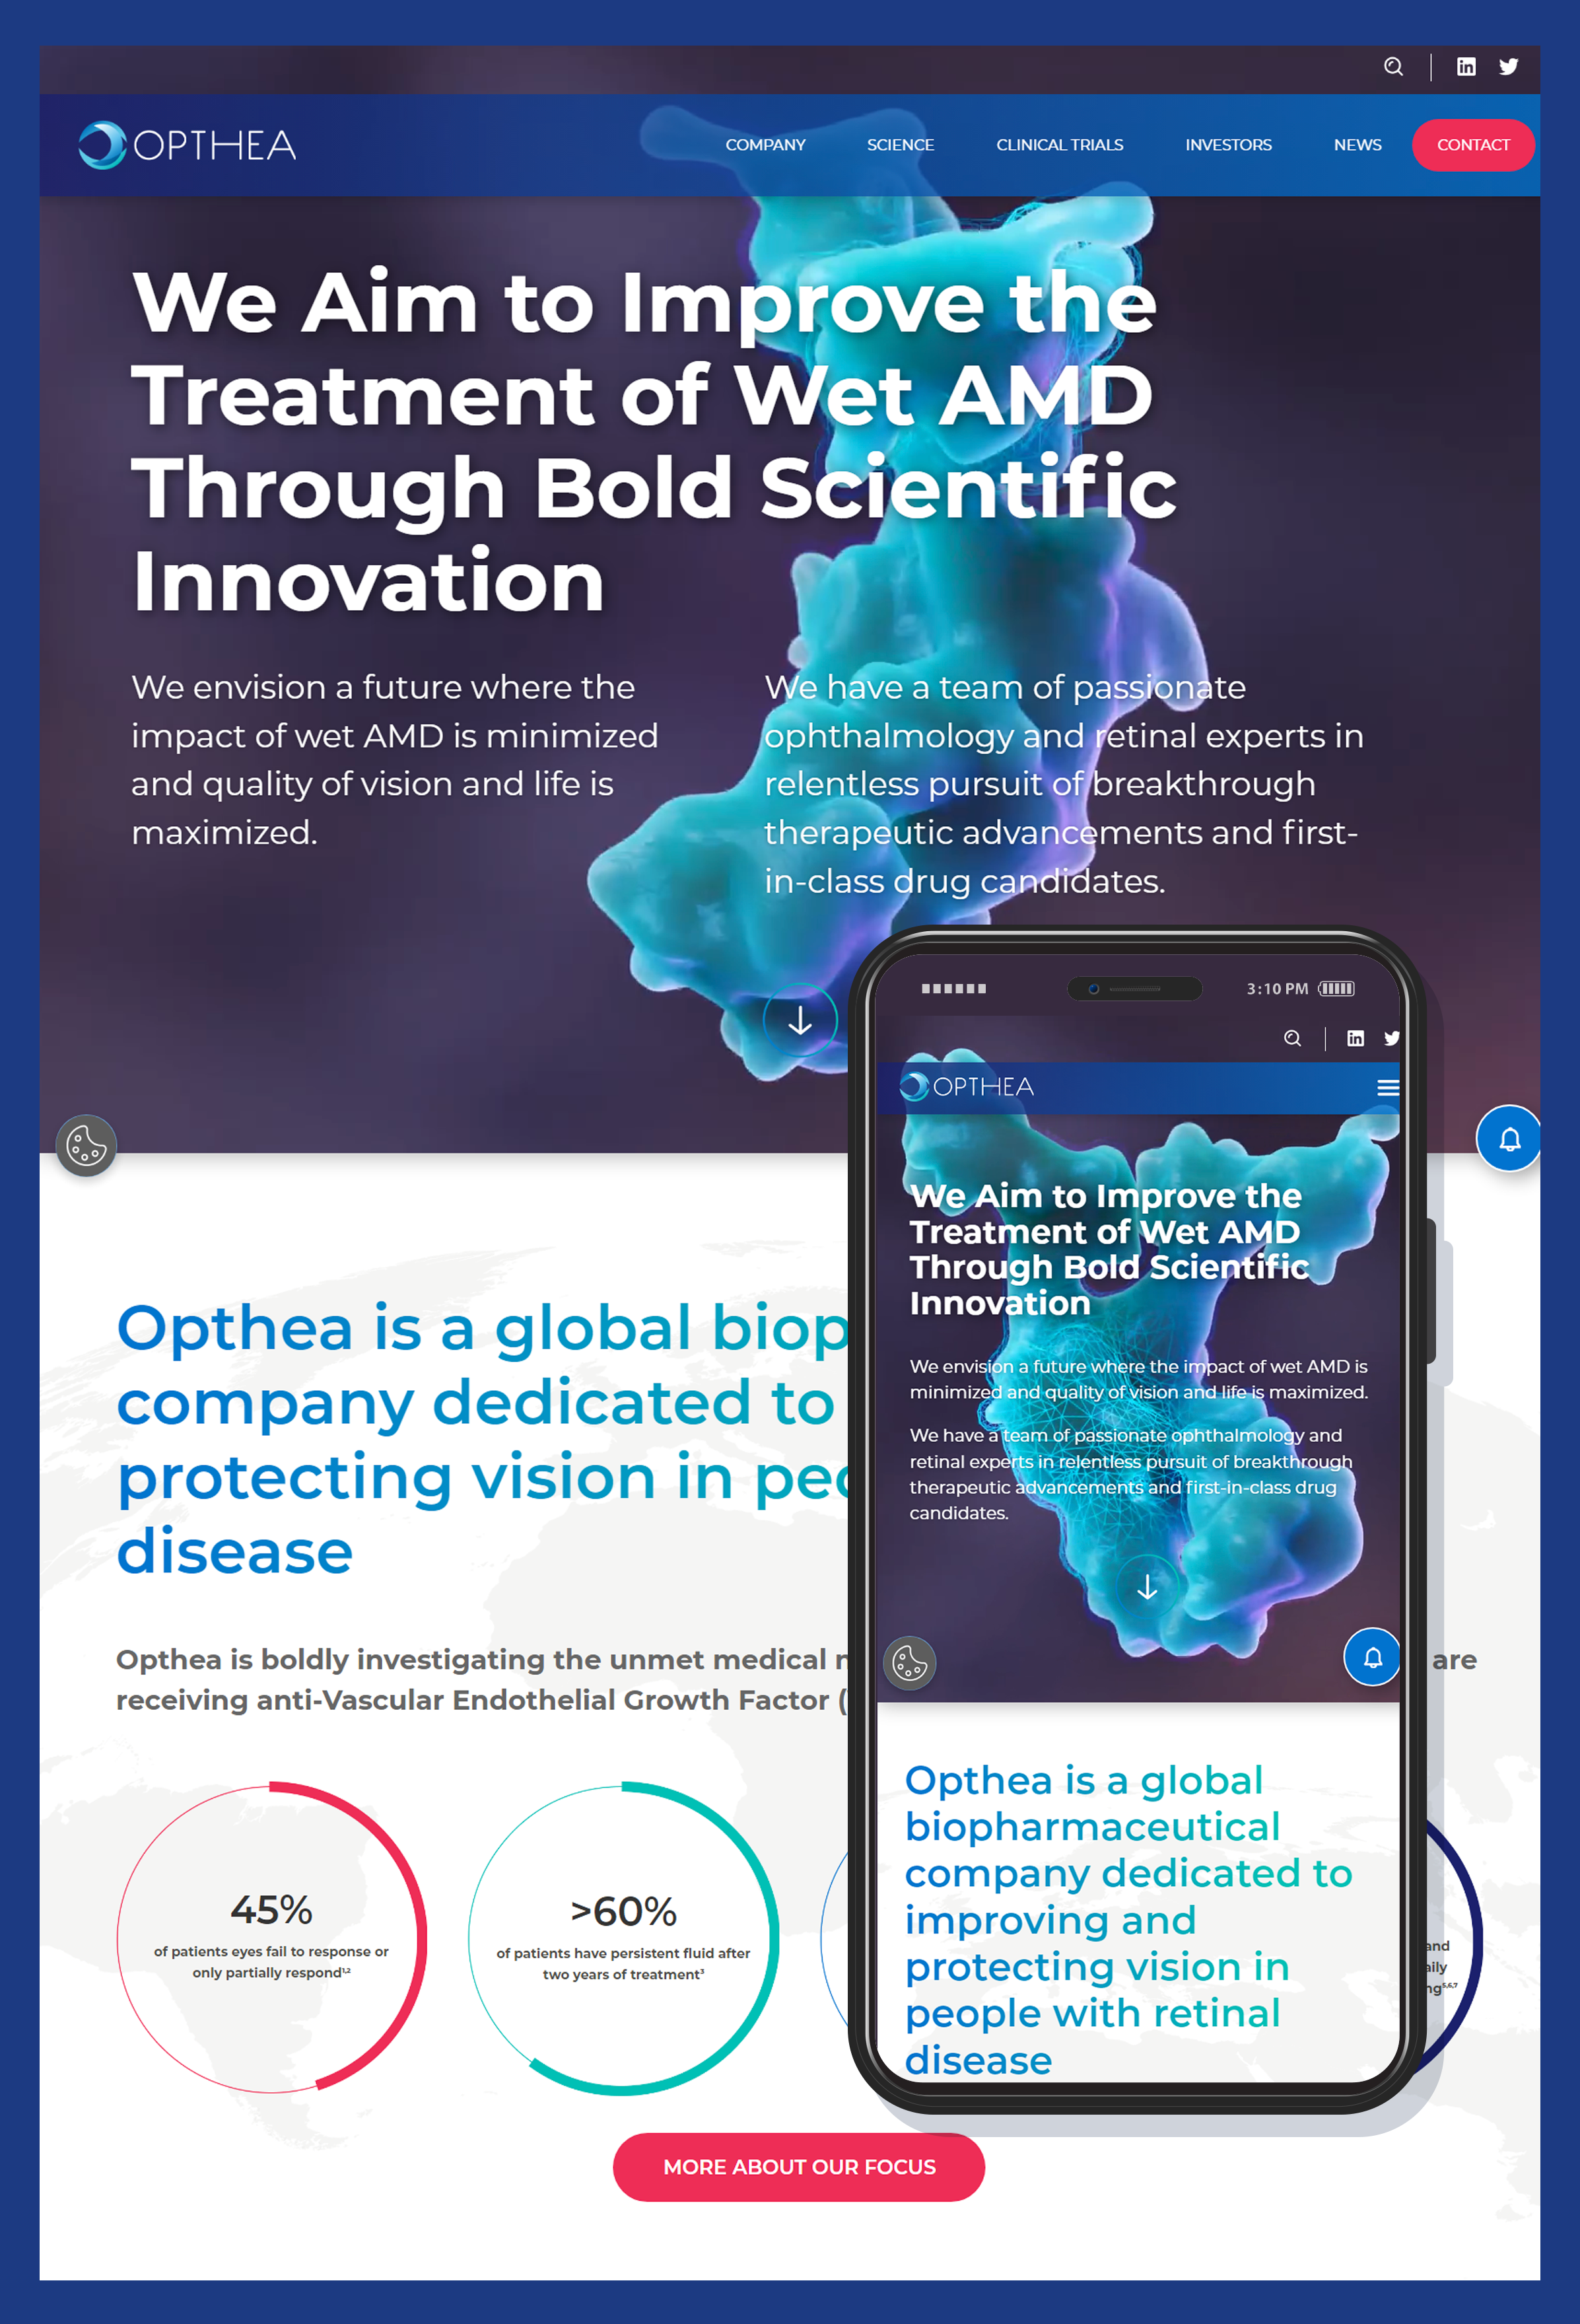 Opthea is a global biopharmaceutical company dedicated to improving and protecting vision in people with retinal disease